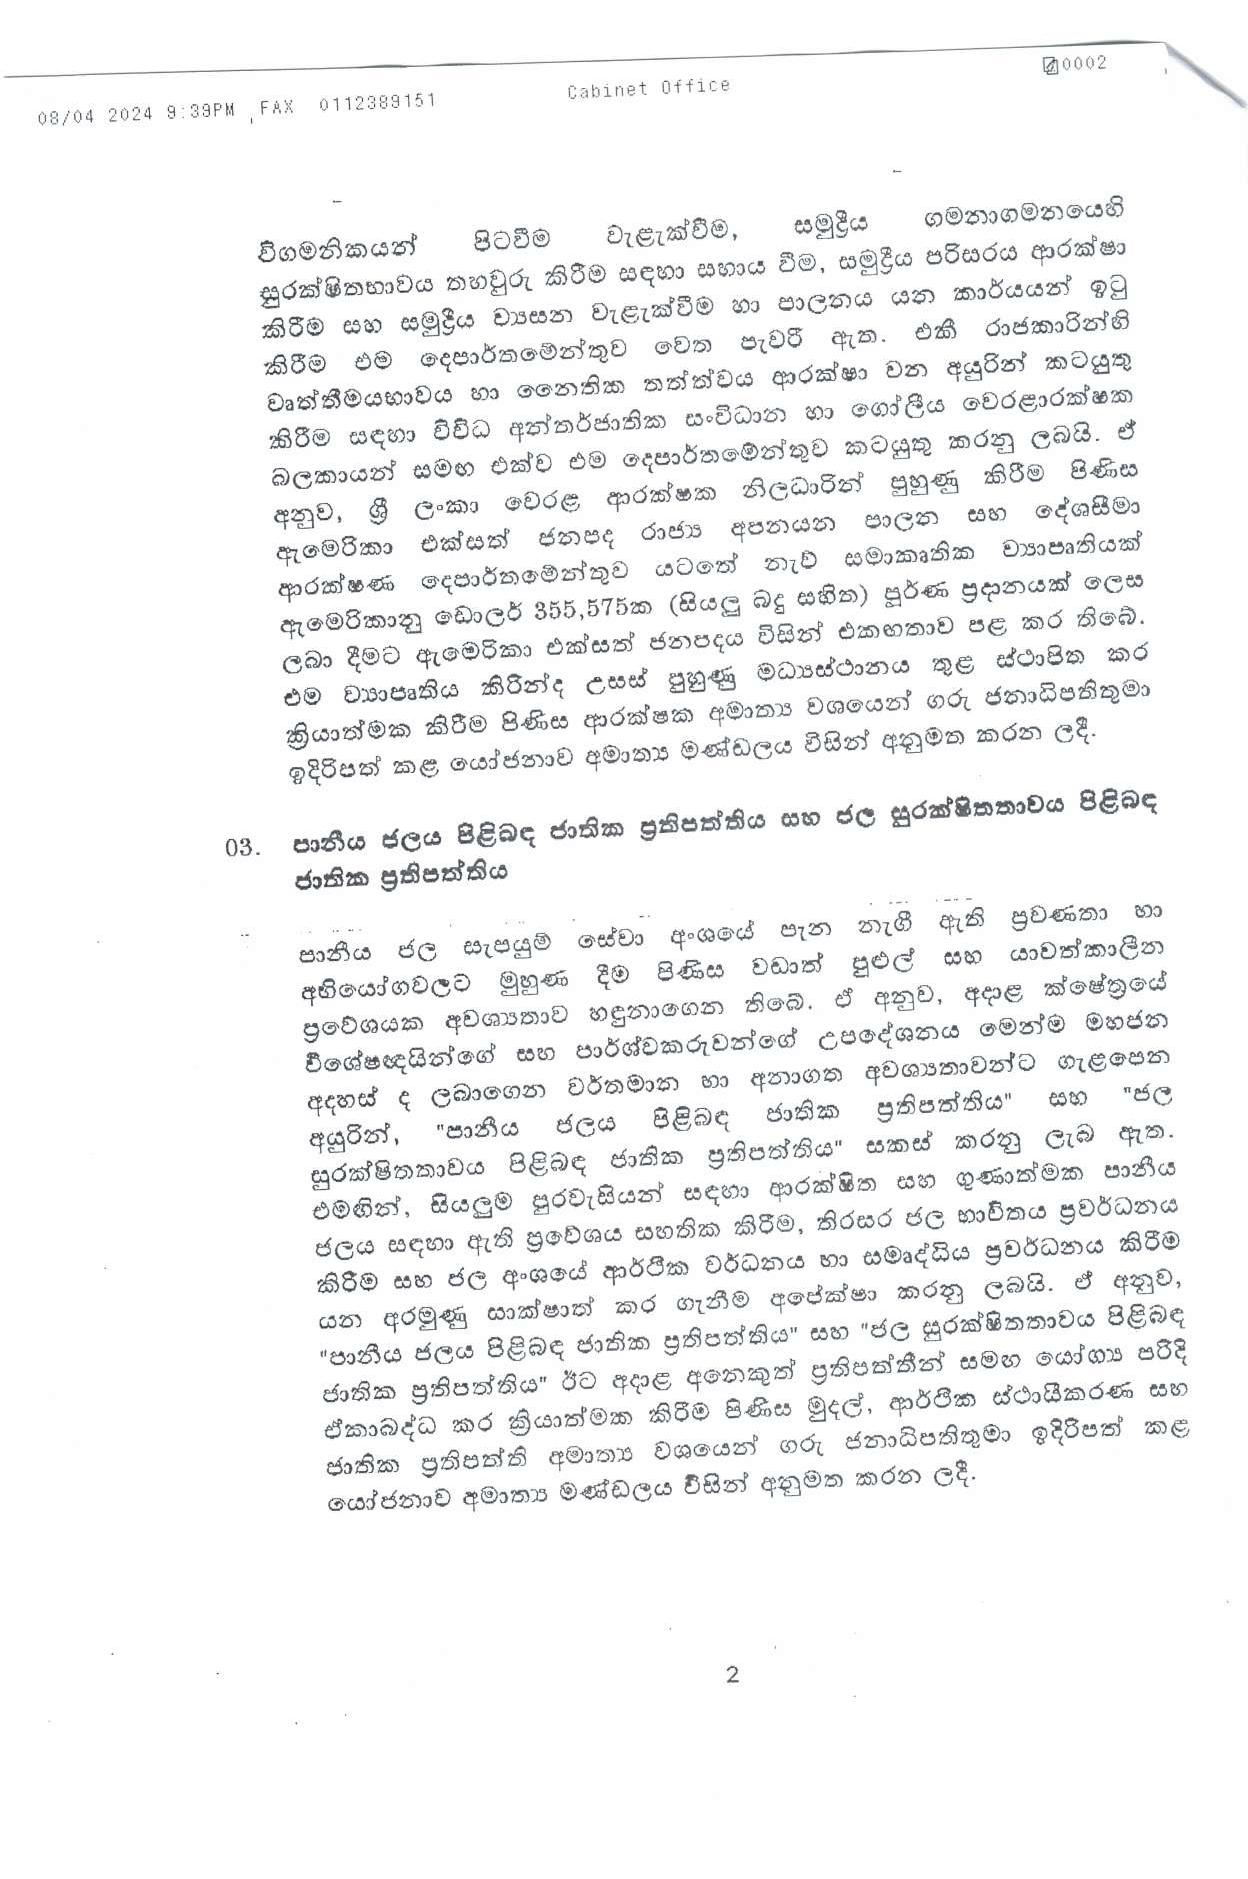 Cabinet Decision on 08.04.2024 page 002